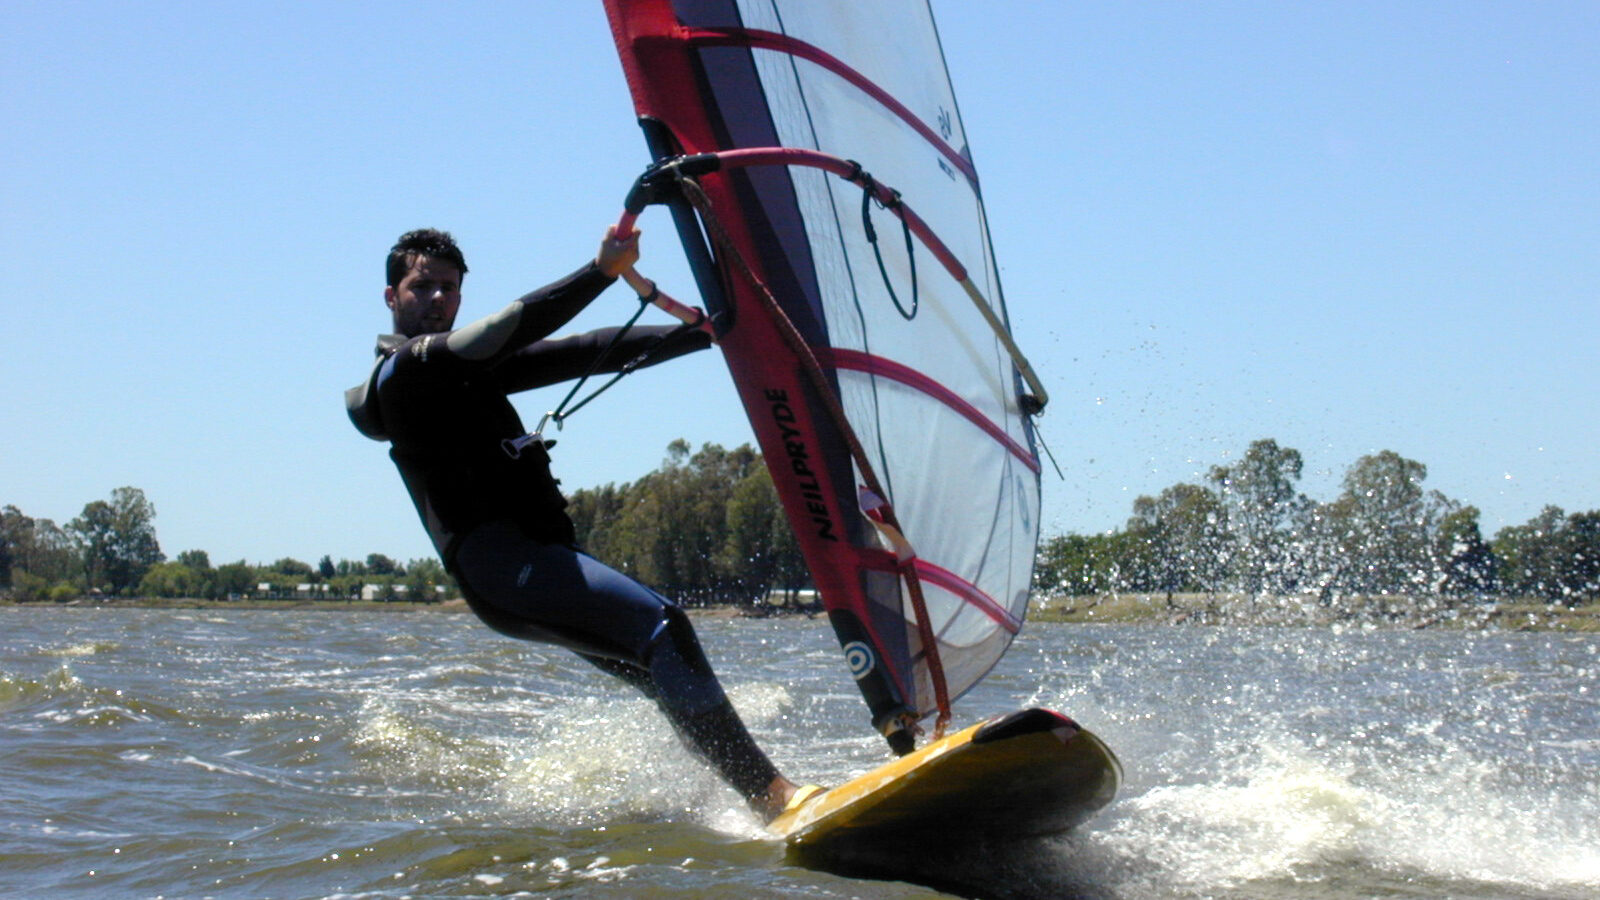 How to use a windsurfing harness